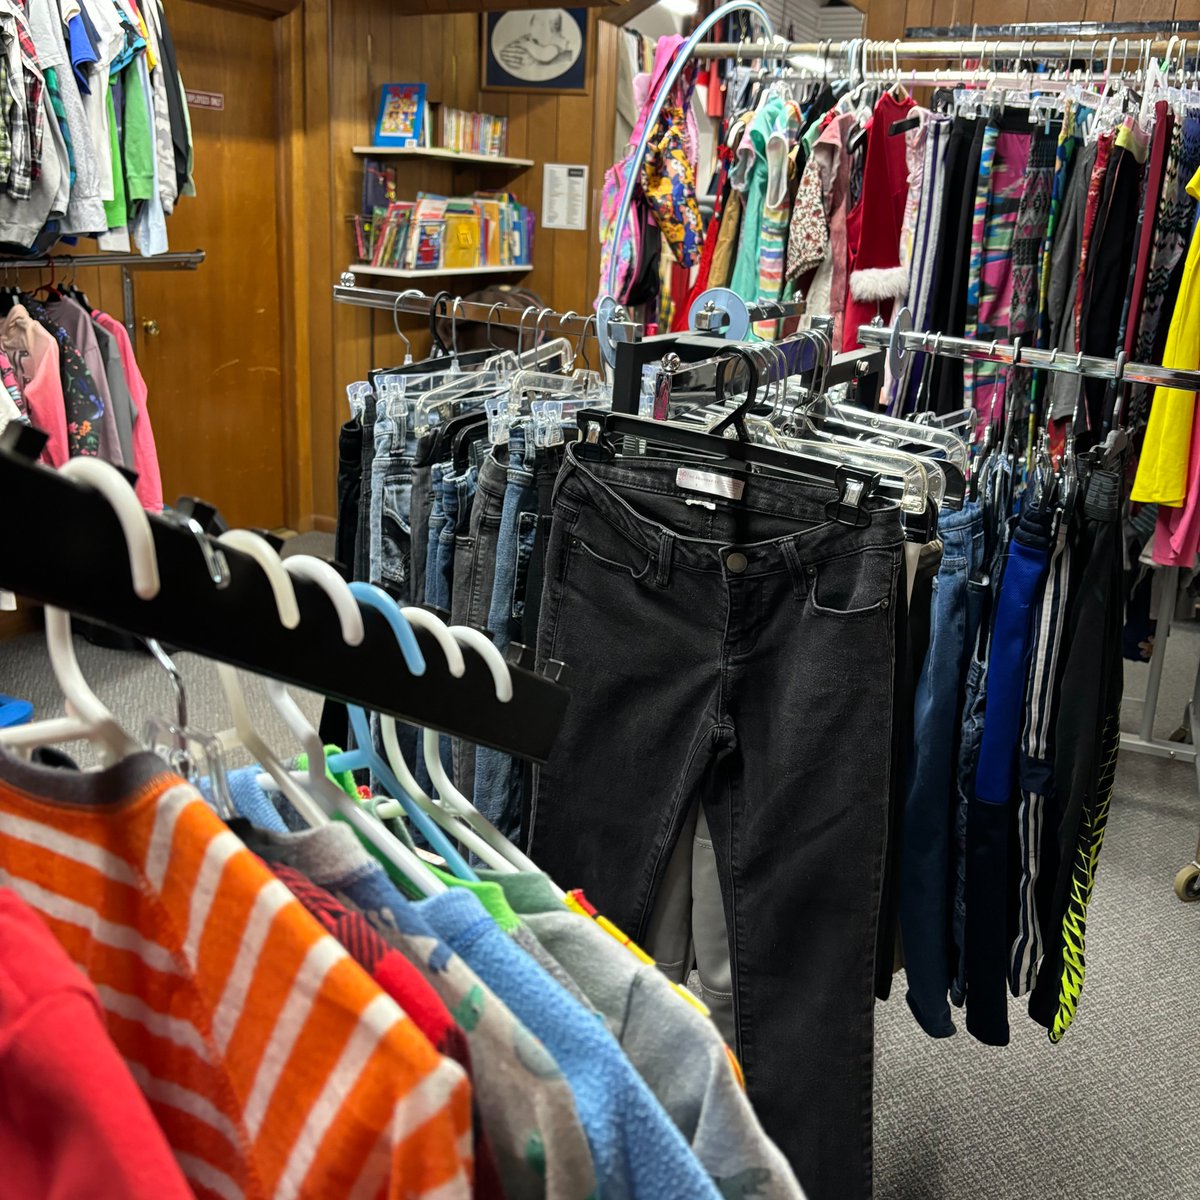 Come to Holdrege Mission Avenue Thrift TODAY to shop our low-cost inventory! Why pay retail? Shop Mission Avenue Thrift FIRST! crossroadsmission.com/thrift-stores/ #MissionAvenueThrift #nowopen #Thriftstore #HoldregeNE